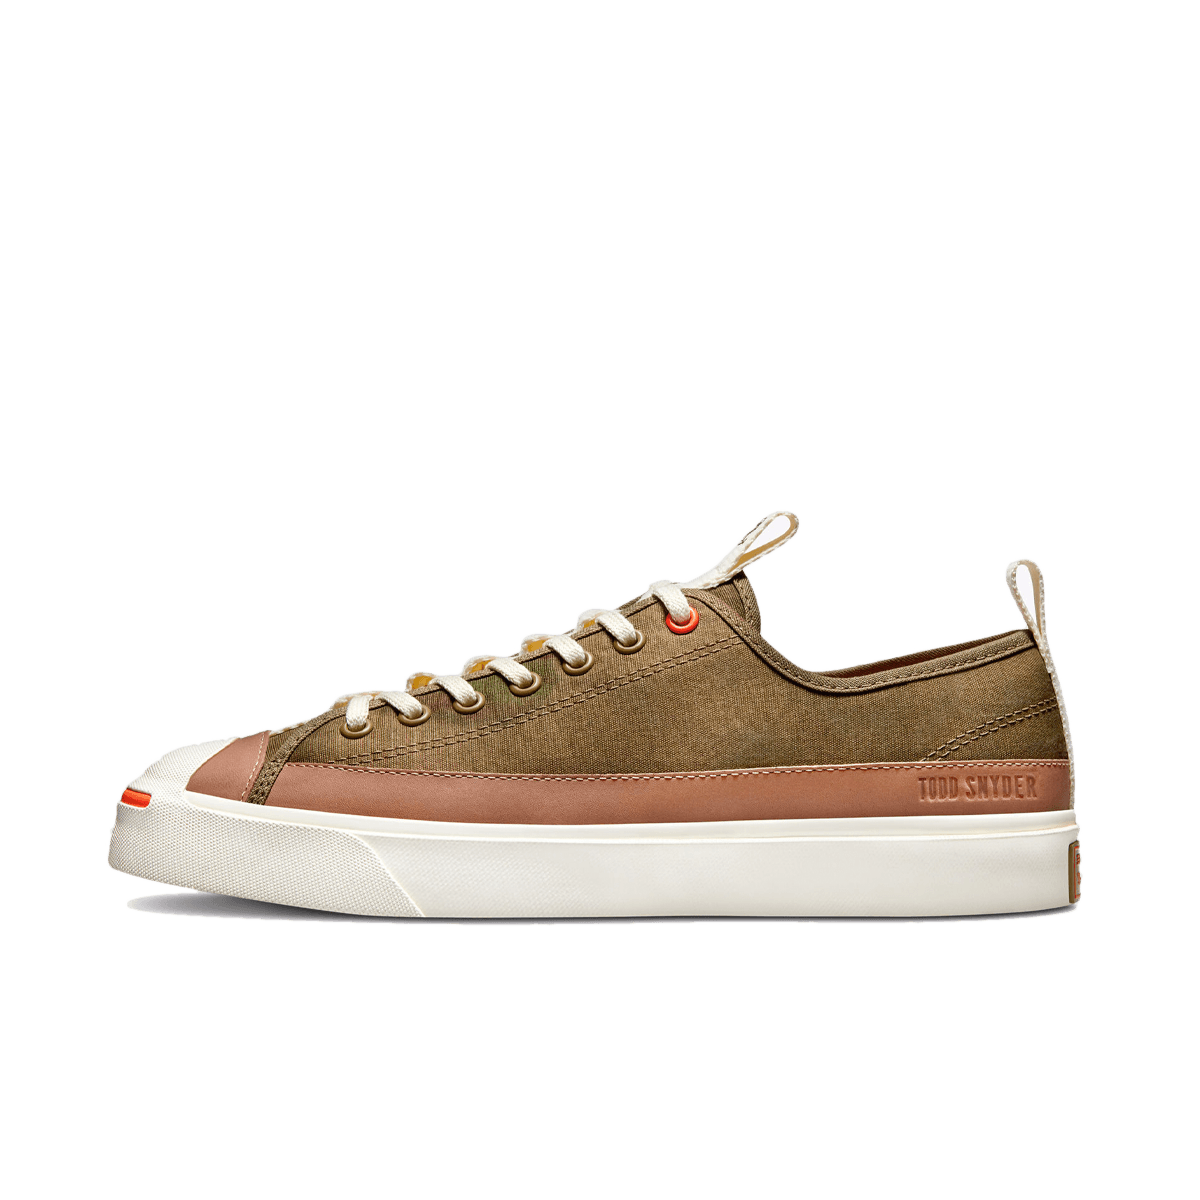 Todd Snyder x Converse Jack Purcell 'Champagne Tan' 173058C